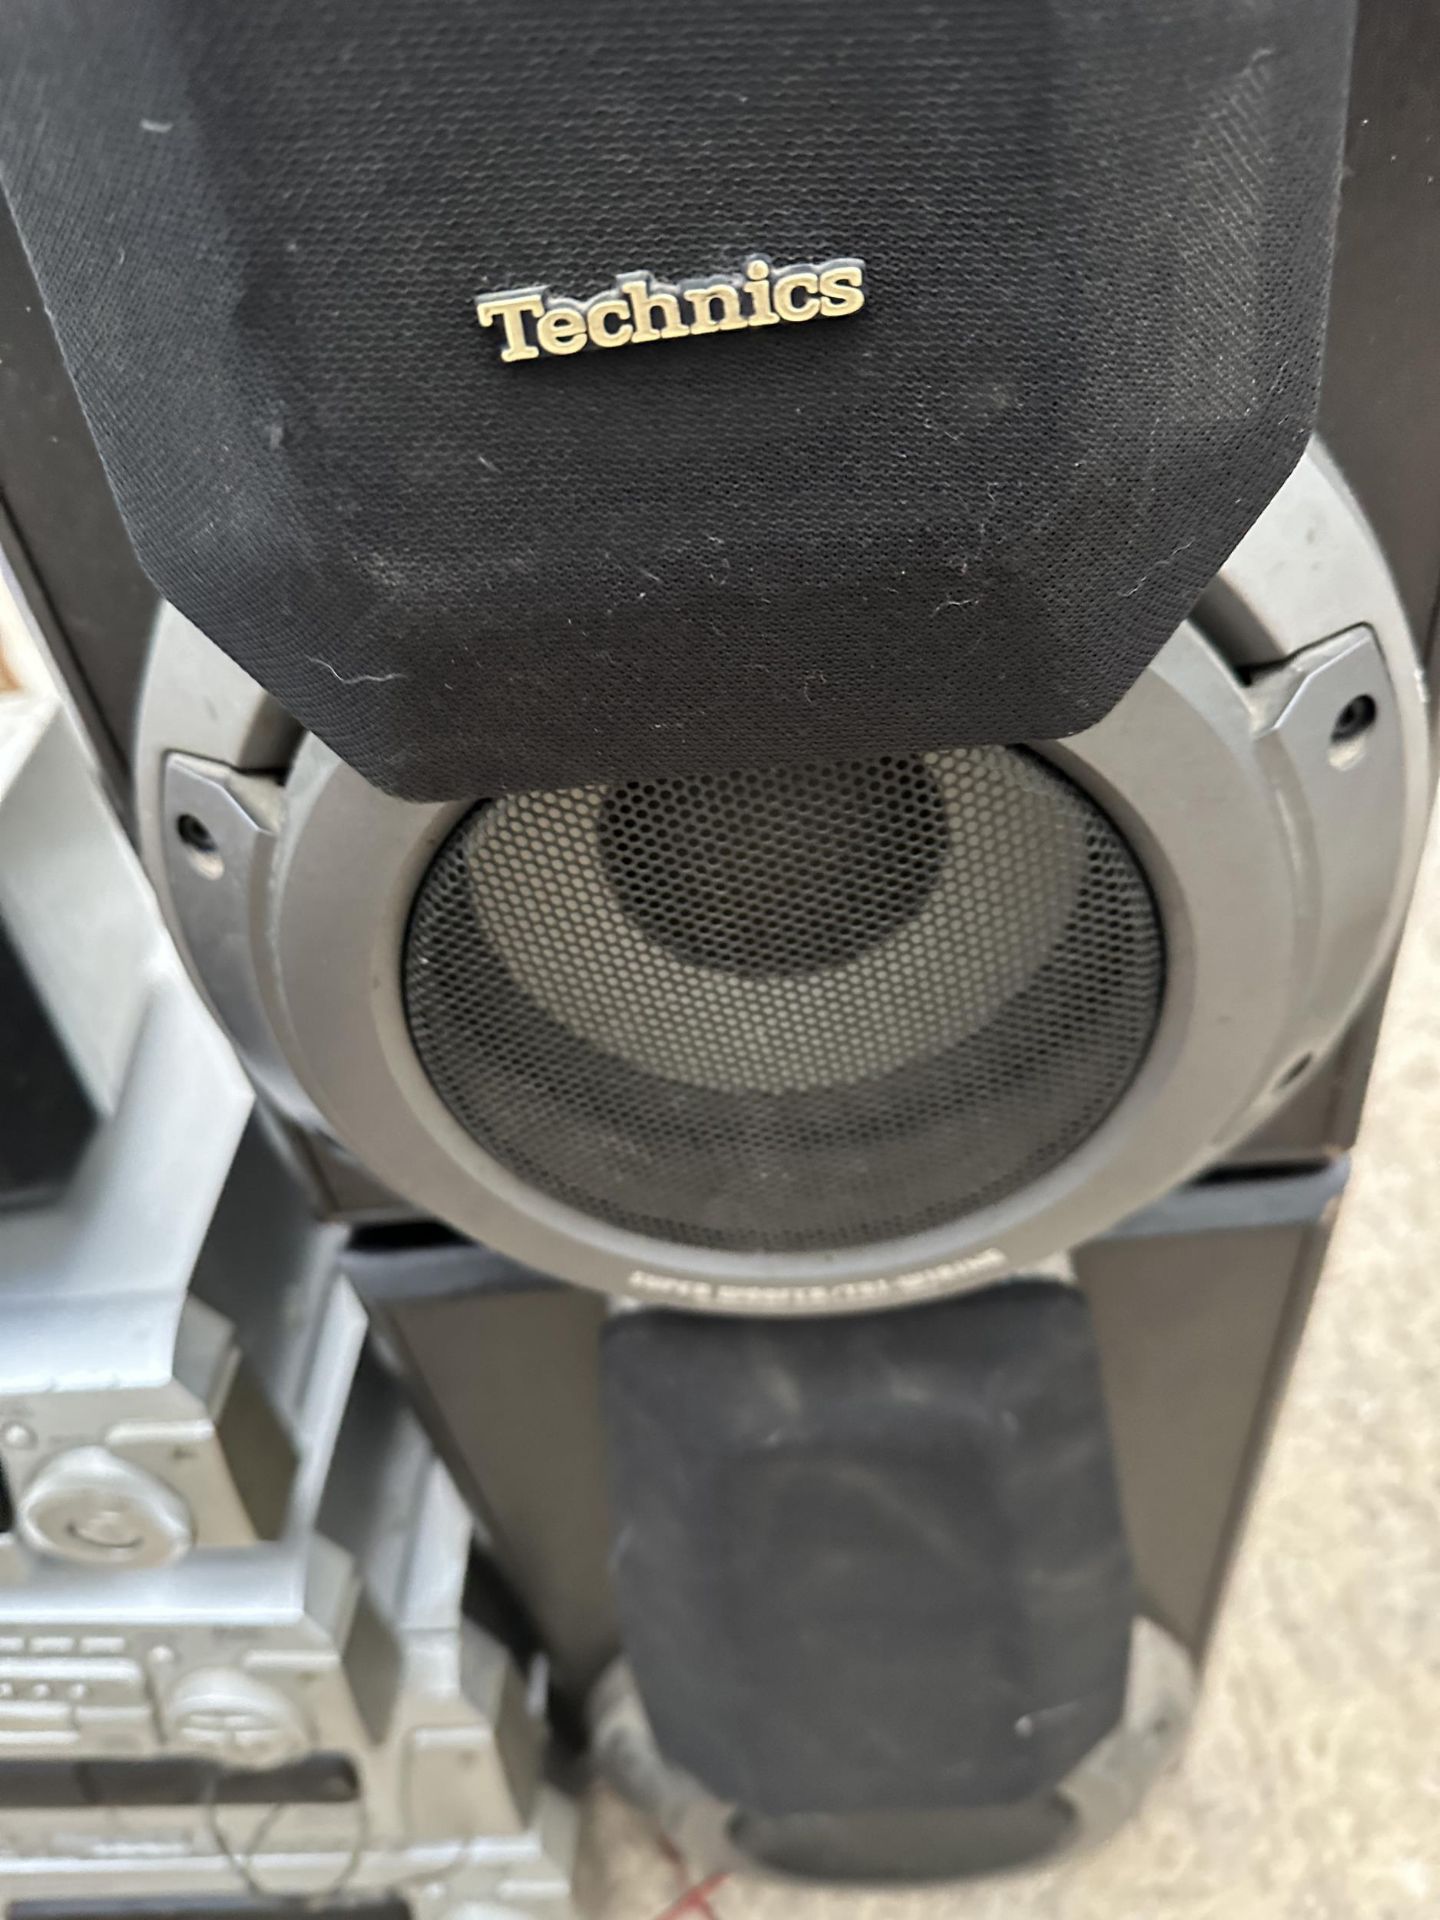 A TECHNICS STEREO SYSTEM AND A PAIR OF TECHNICS SPEAKERS - Image 3 of 3